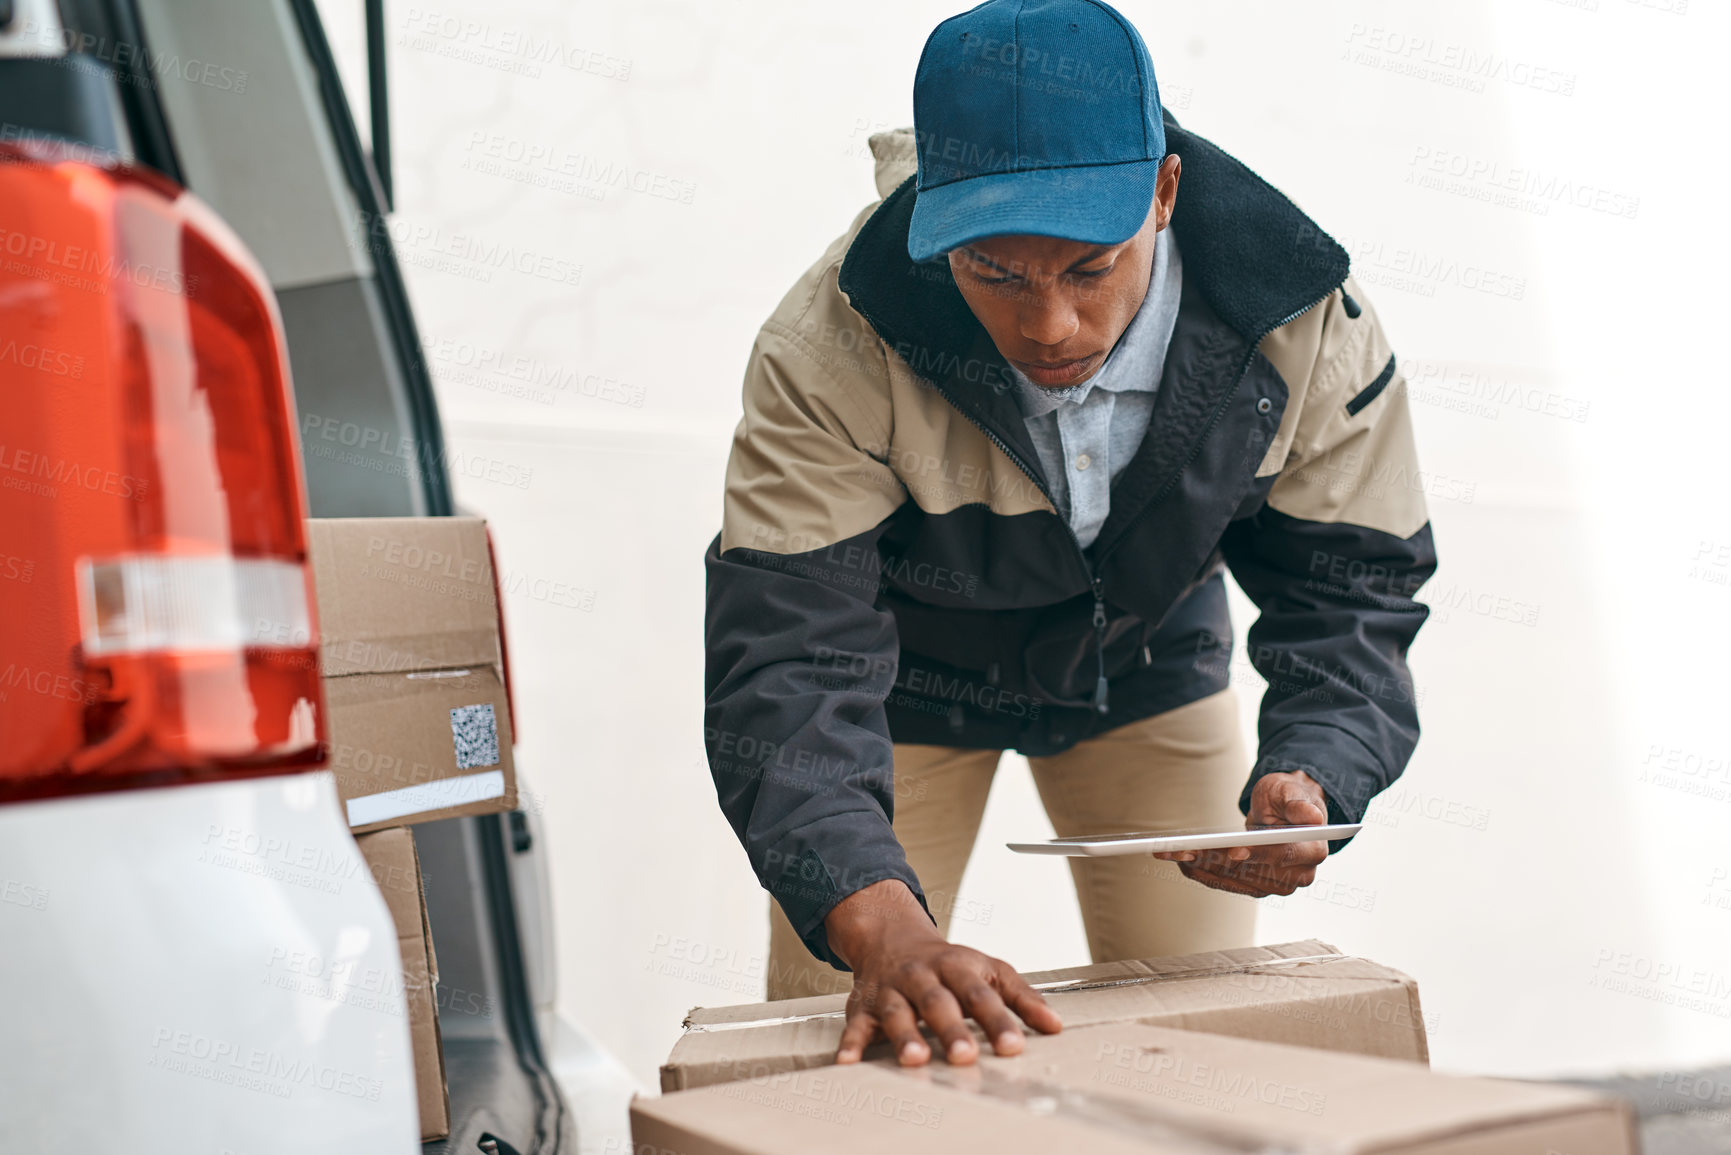 Buy stock photo Shot of a courier using a digital tablet while sorting boxes from a delivery van